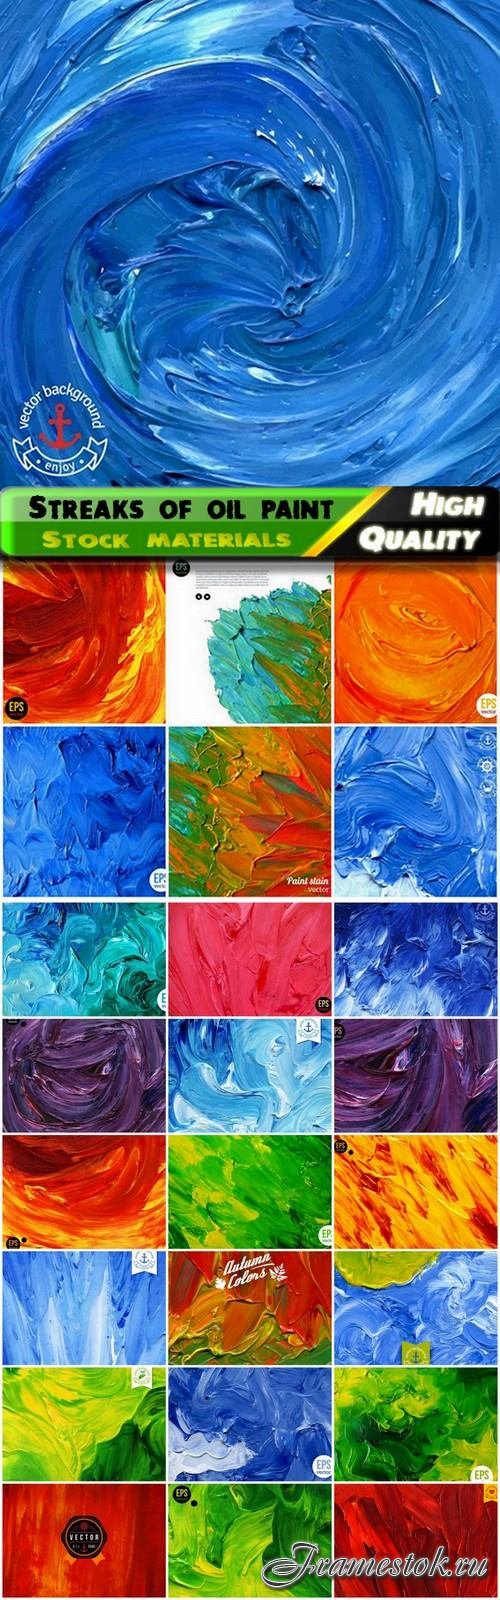 Backgrounds and textures of realistic painted with oil paint - 25 Eps